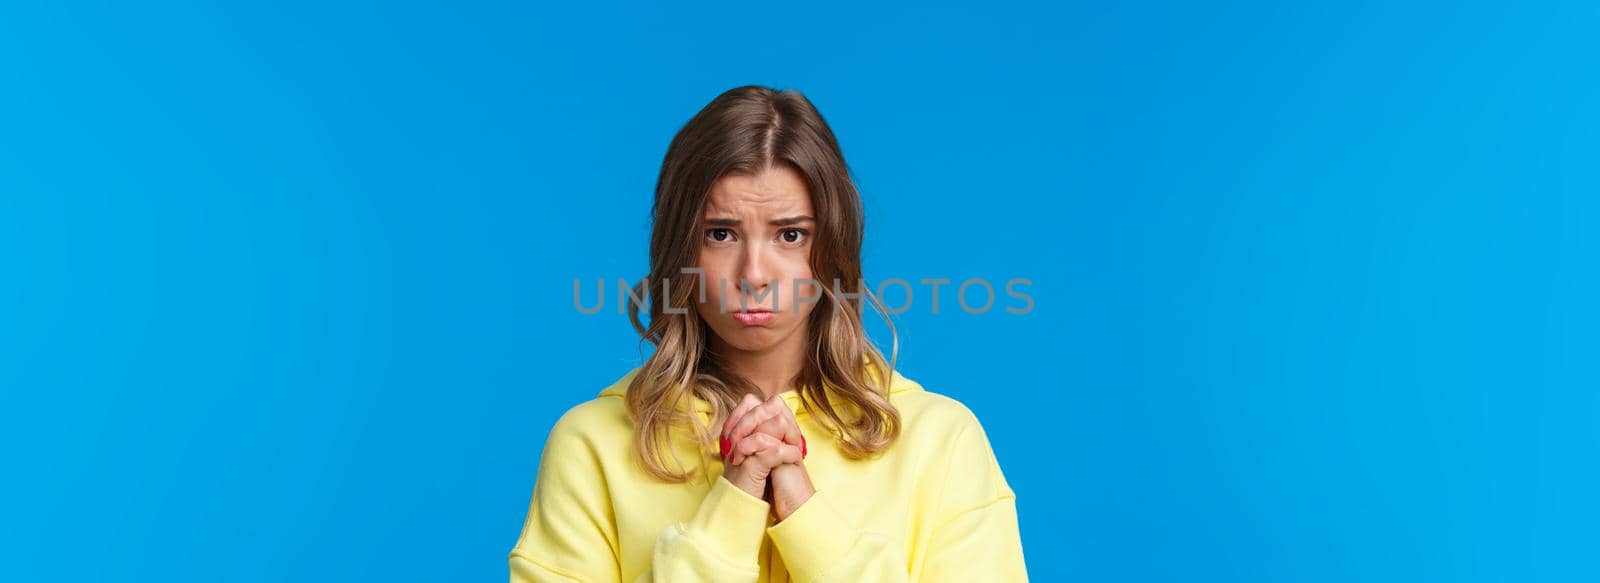 Close-up portrait of innocent cute and silly sulking girl with blond hair begging for help, hold hands in supplication pray gesture, frowning asking favour, need something and pleading.